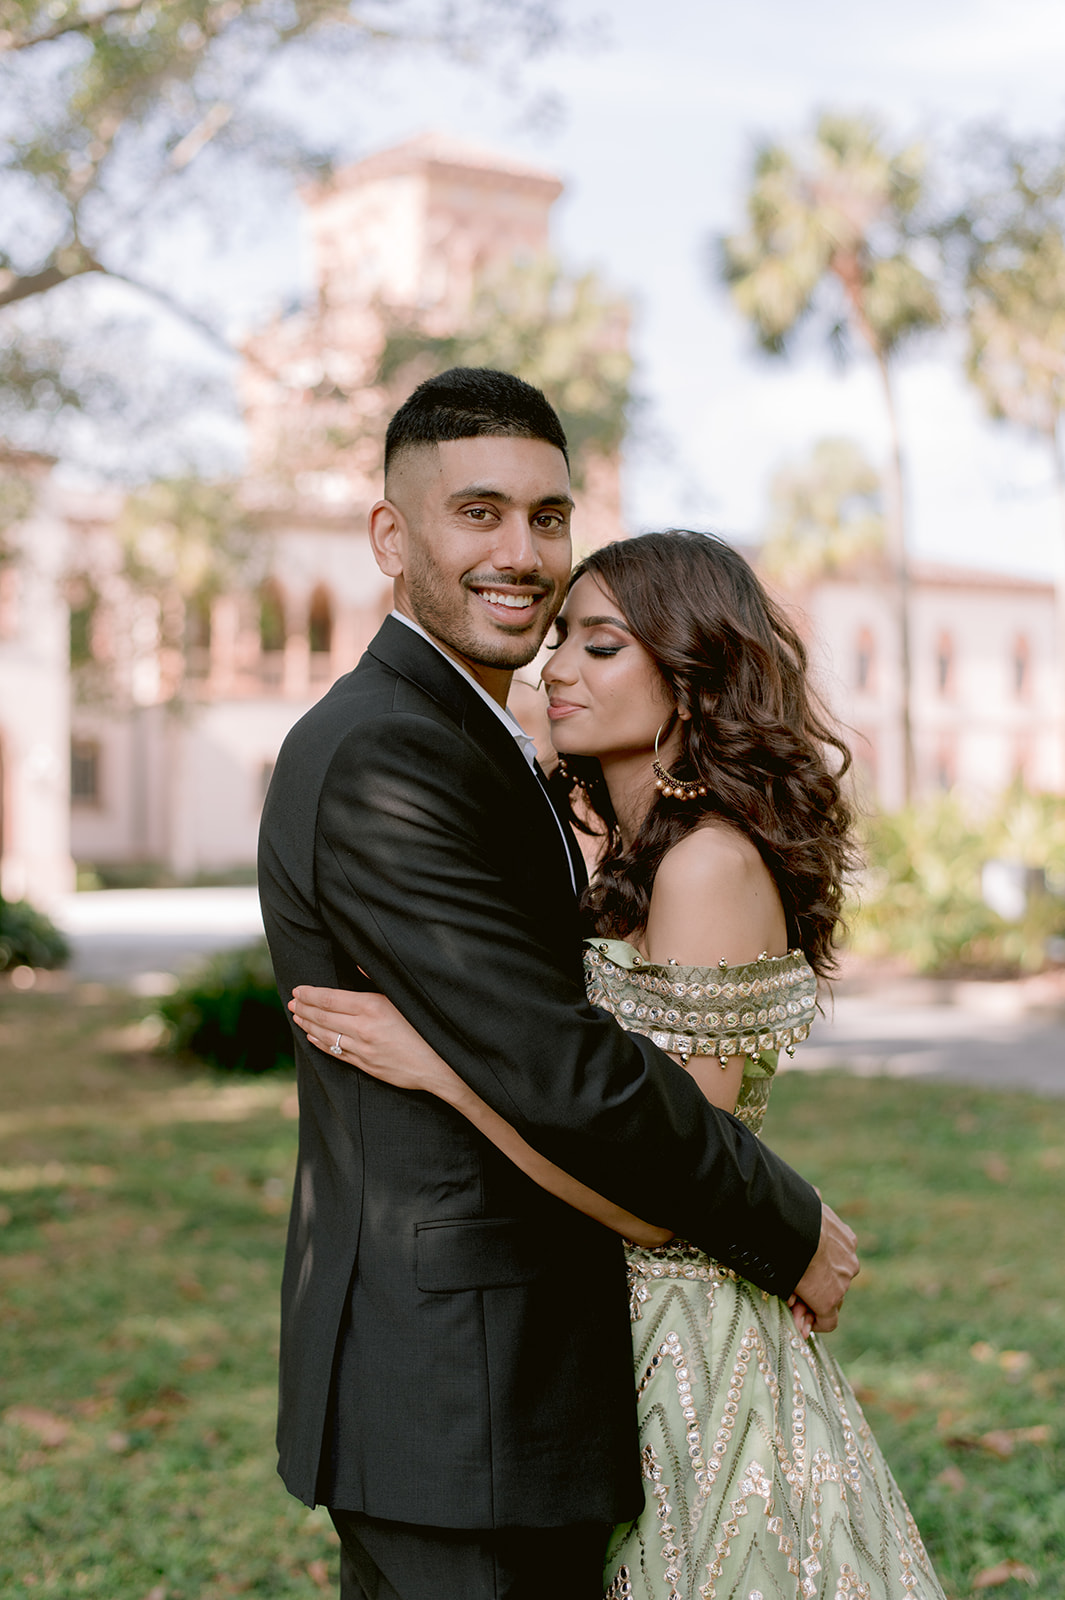 "Stunning Ringling Museum engagement session with Indian couple in love and beautiful location"
